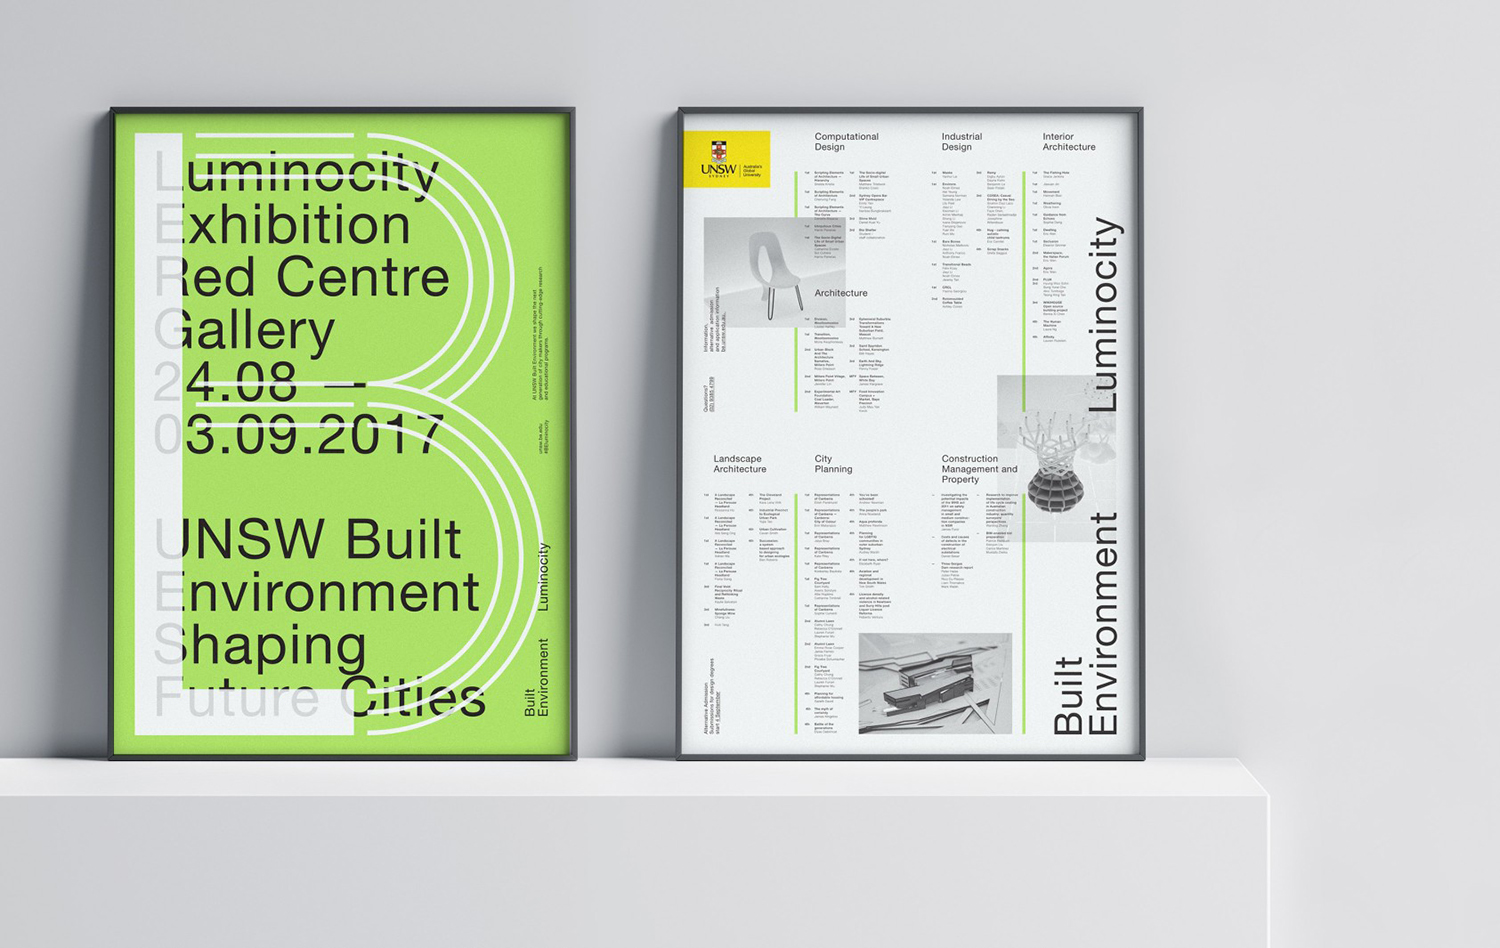 Graphic identity designed by Toko for the UNSW Build Environment faculty and exhibition design for the annual Luminocity exhibition